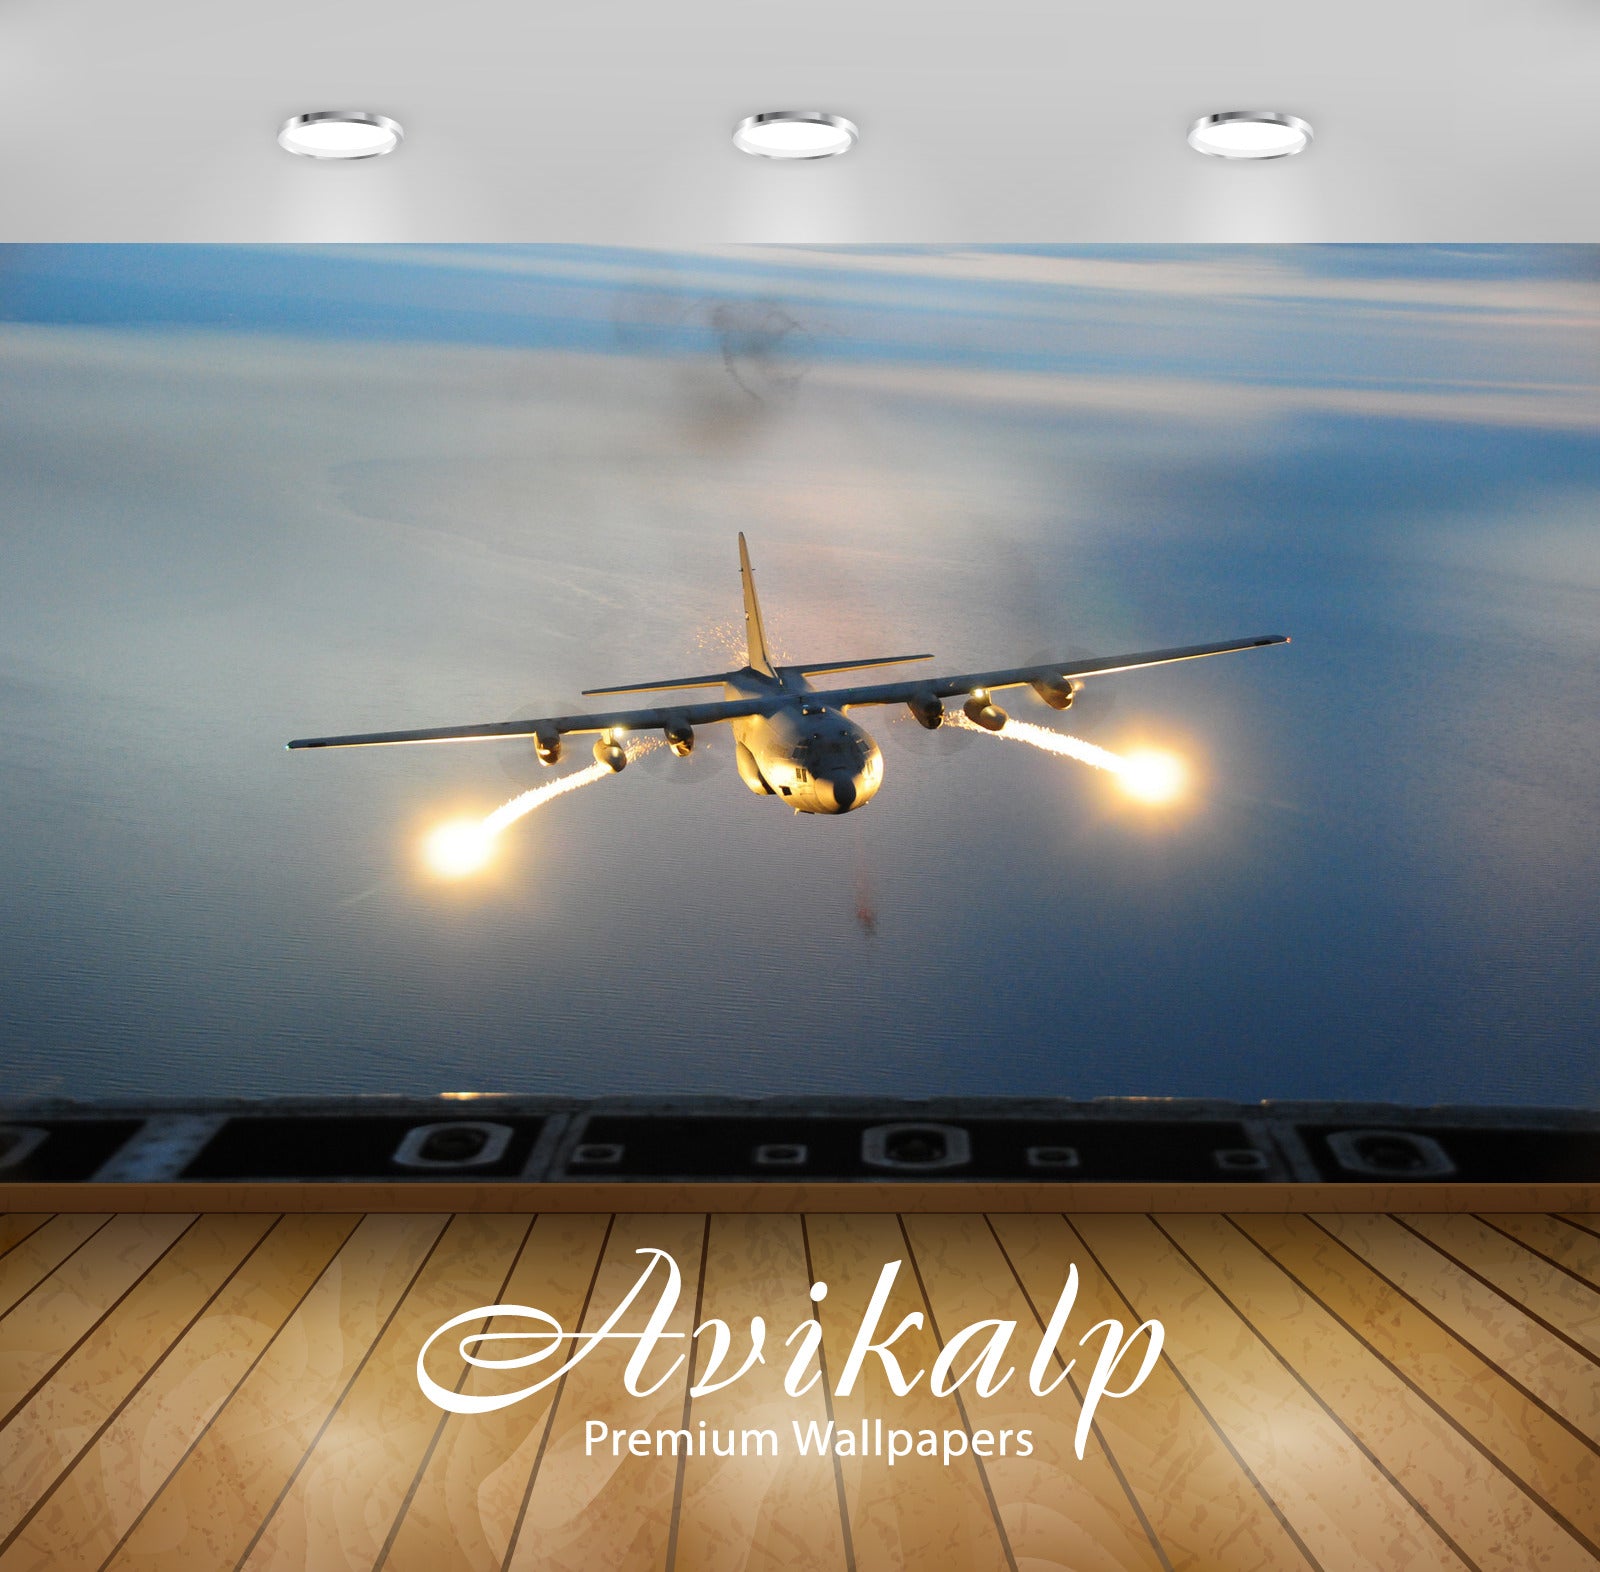 Avikalp Exclusive Awi1978 Flares On A Plane Full HD Wallpapers for Living room, Hall, Kids Room, Kit